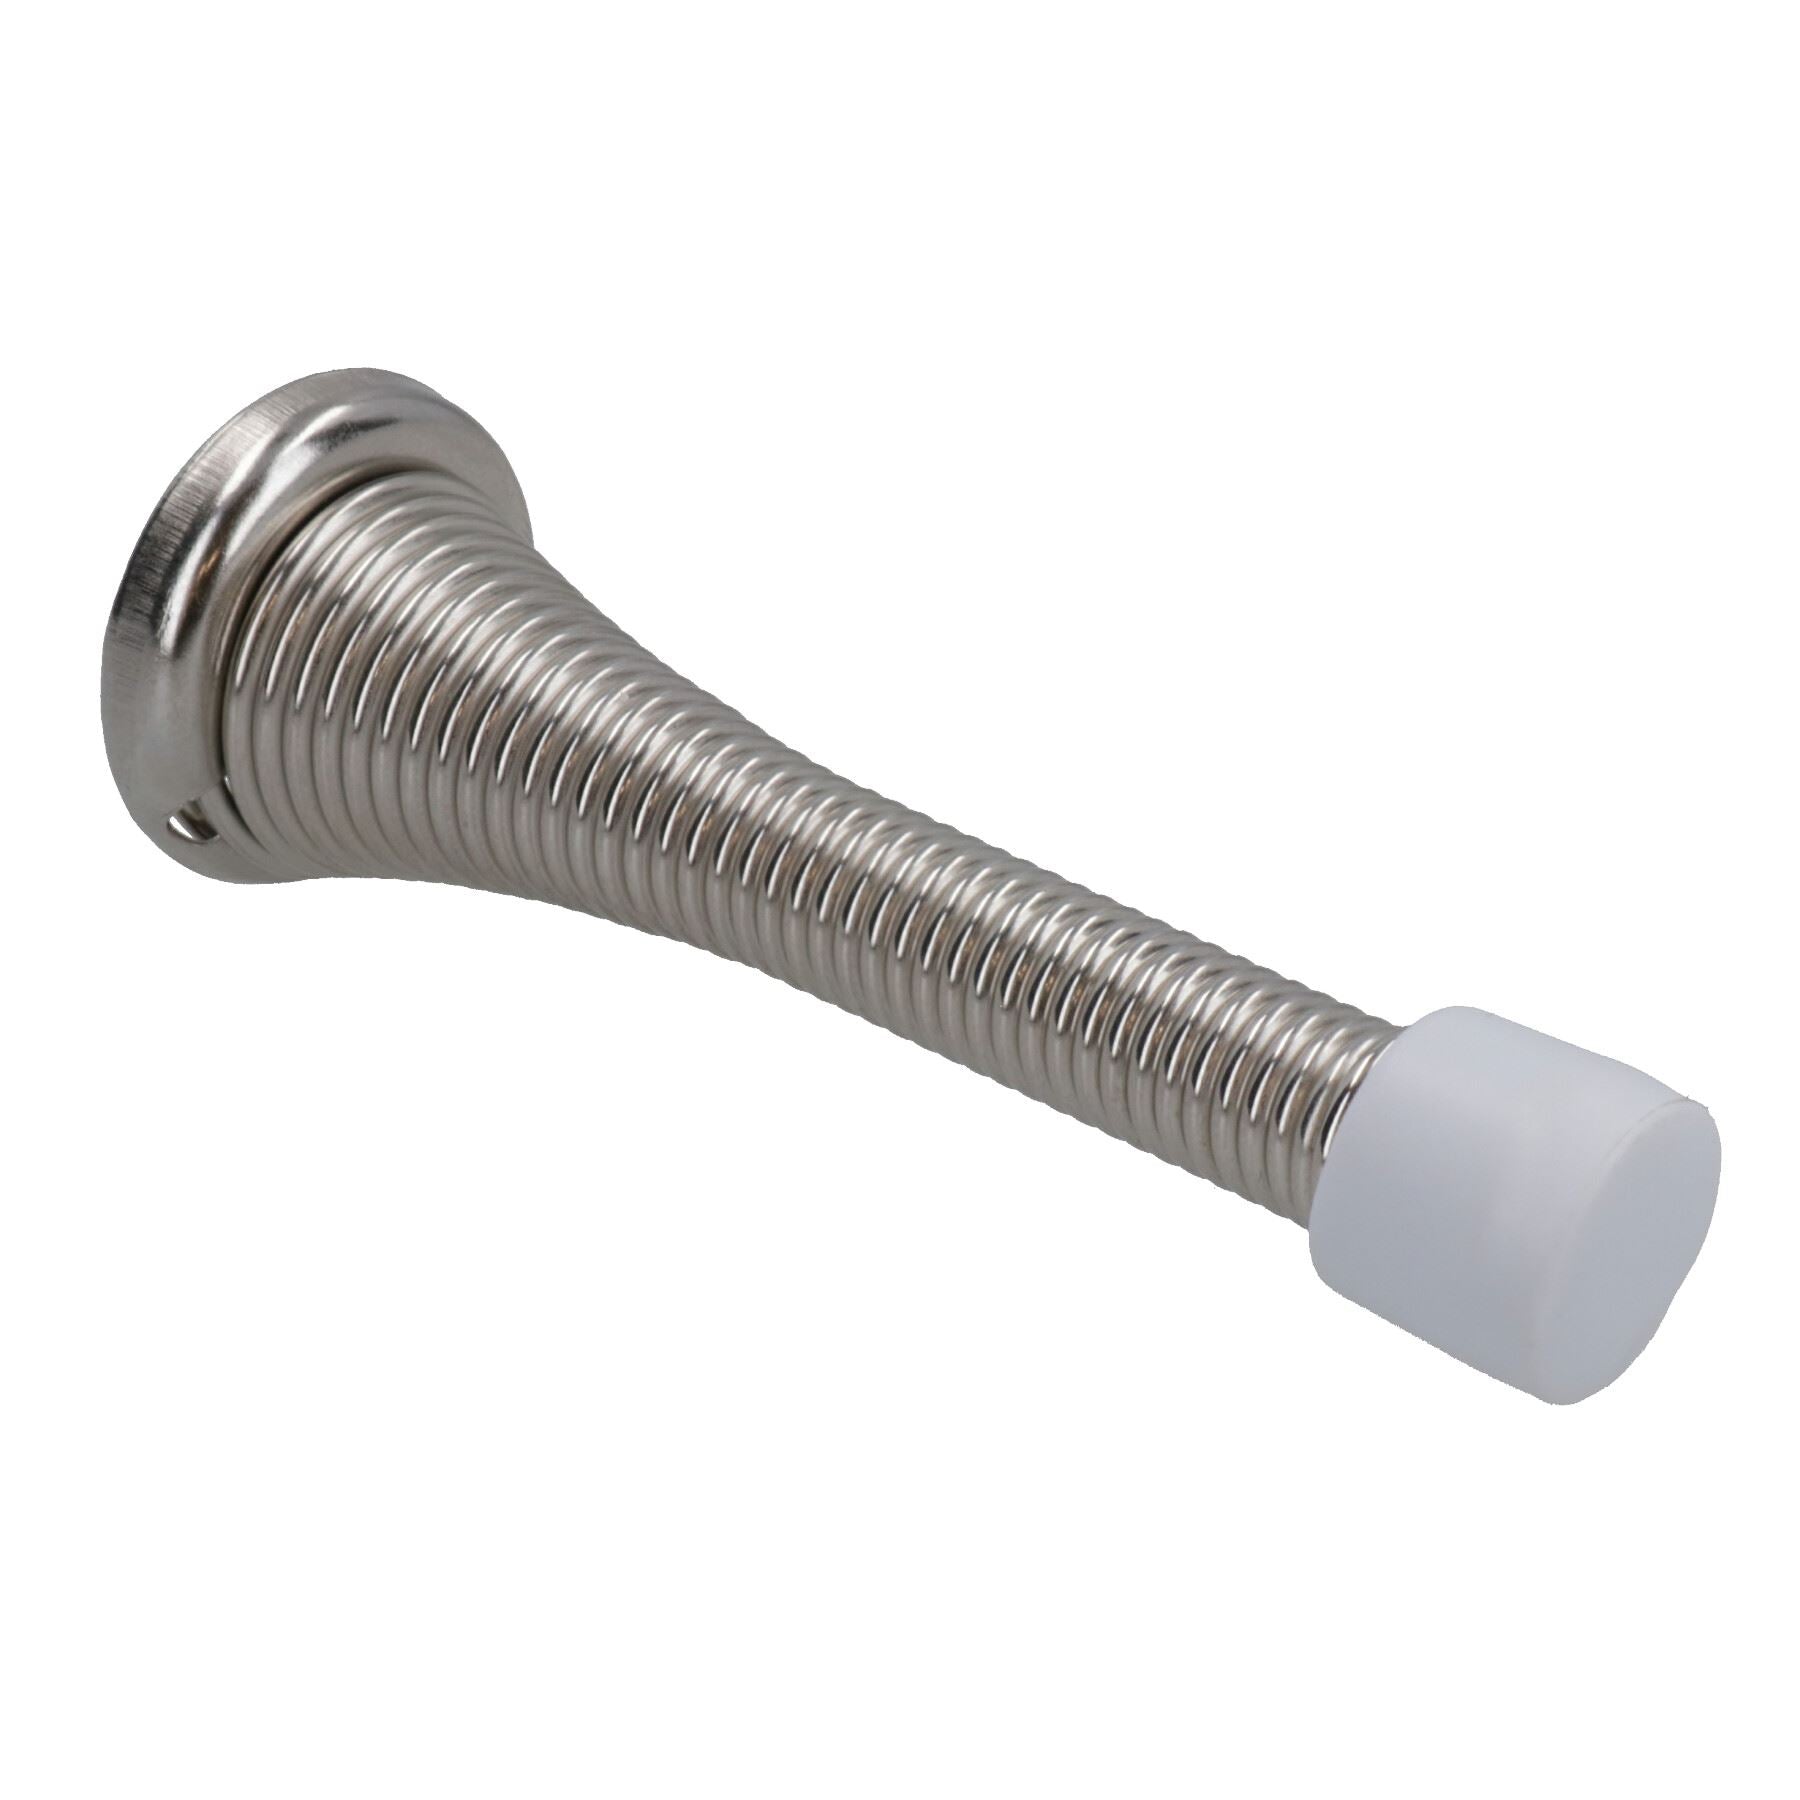 Spring Door Stops Stopper Buffer Skirting Protection Wall Mounted With Fastener